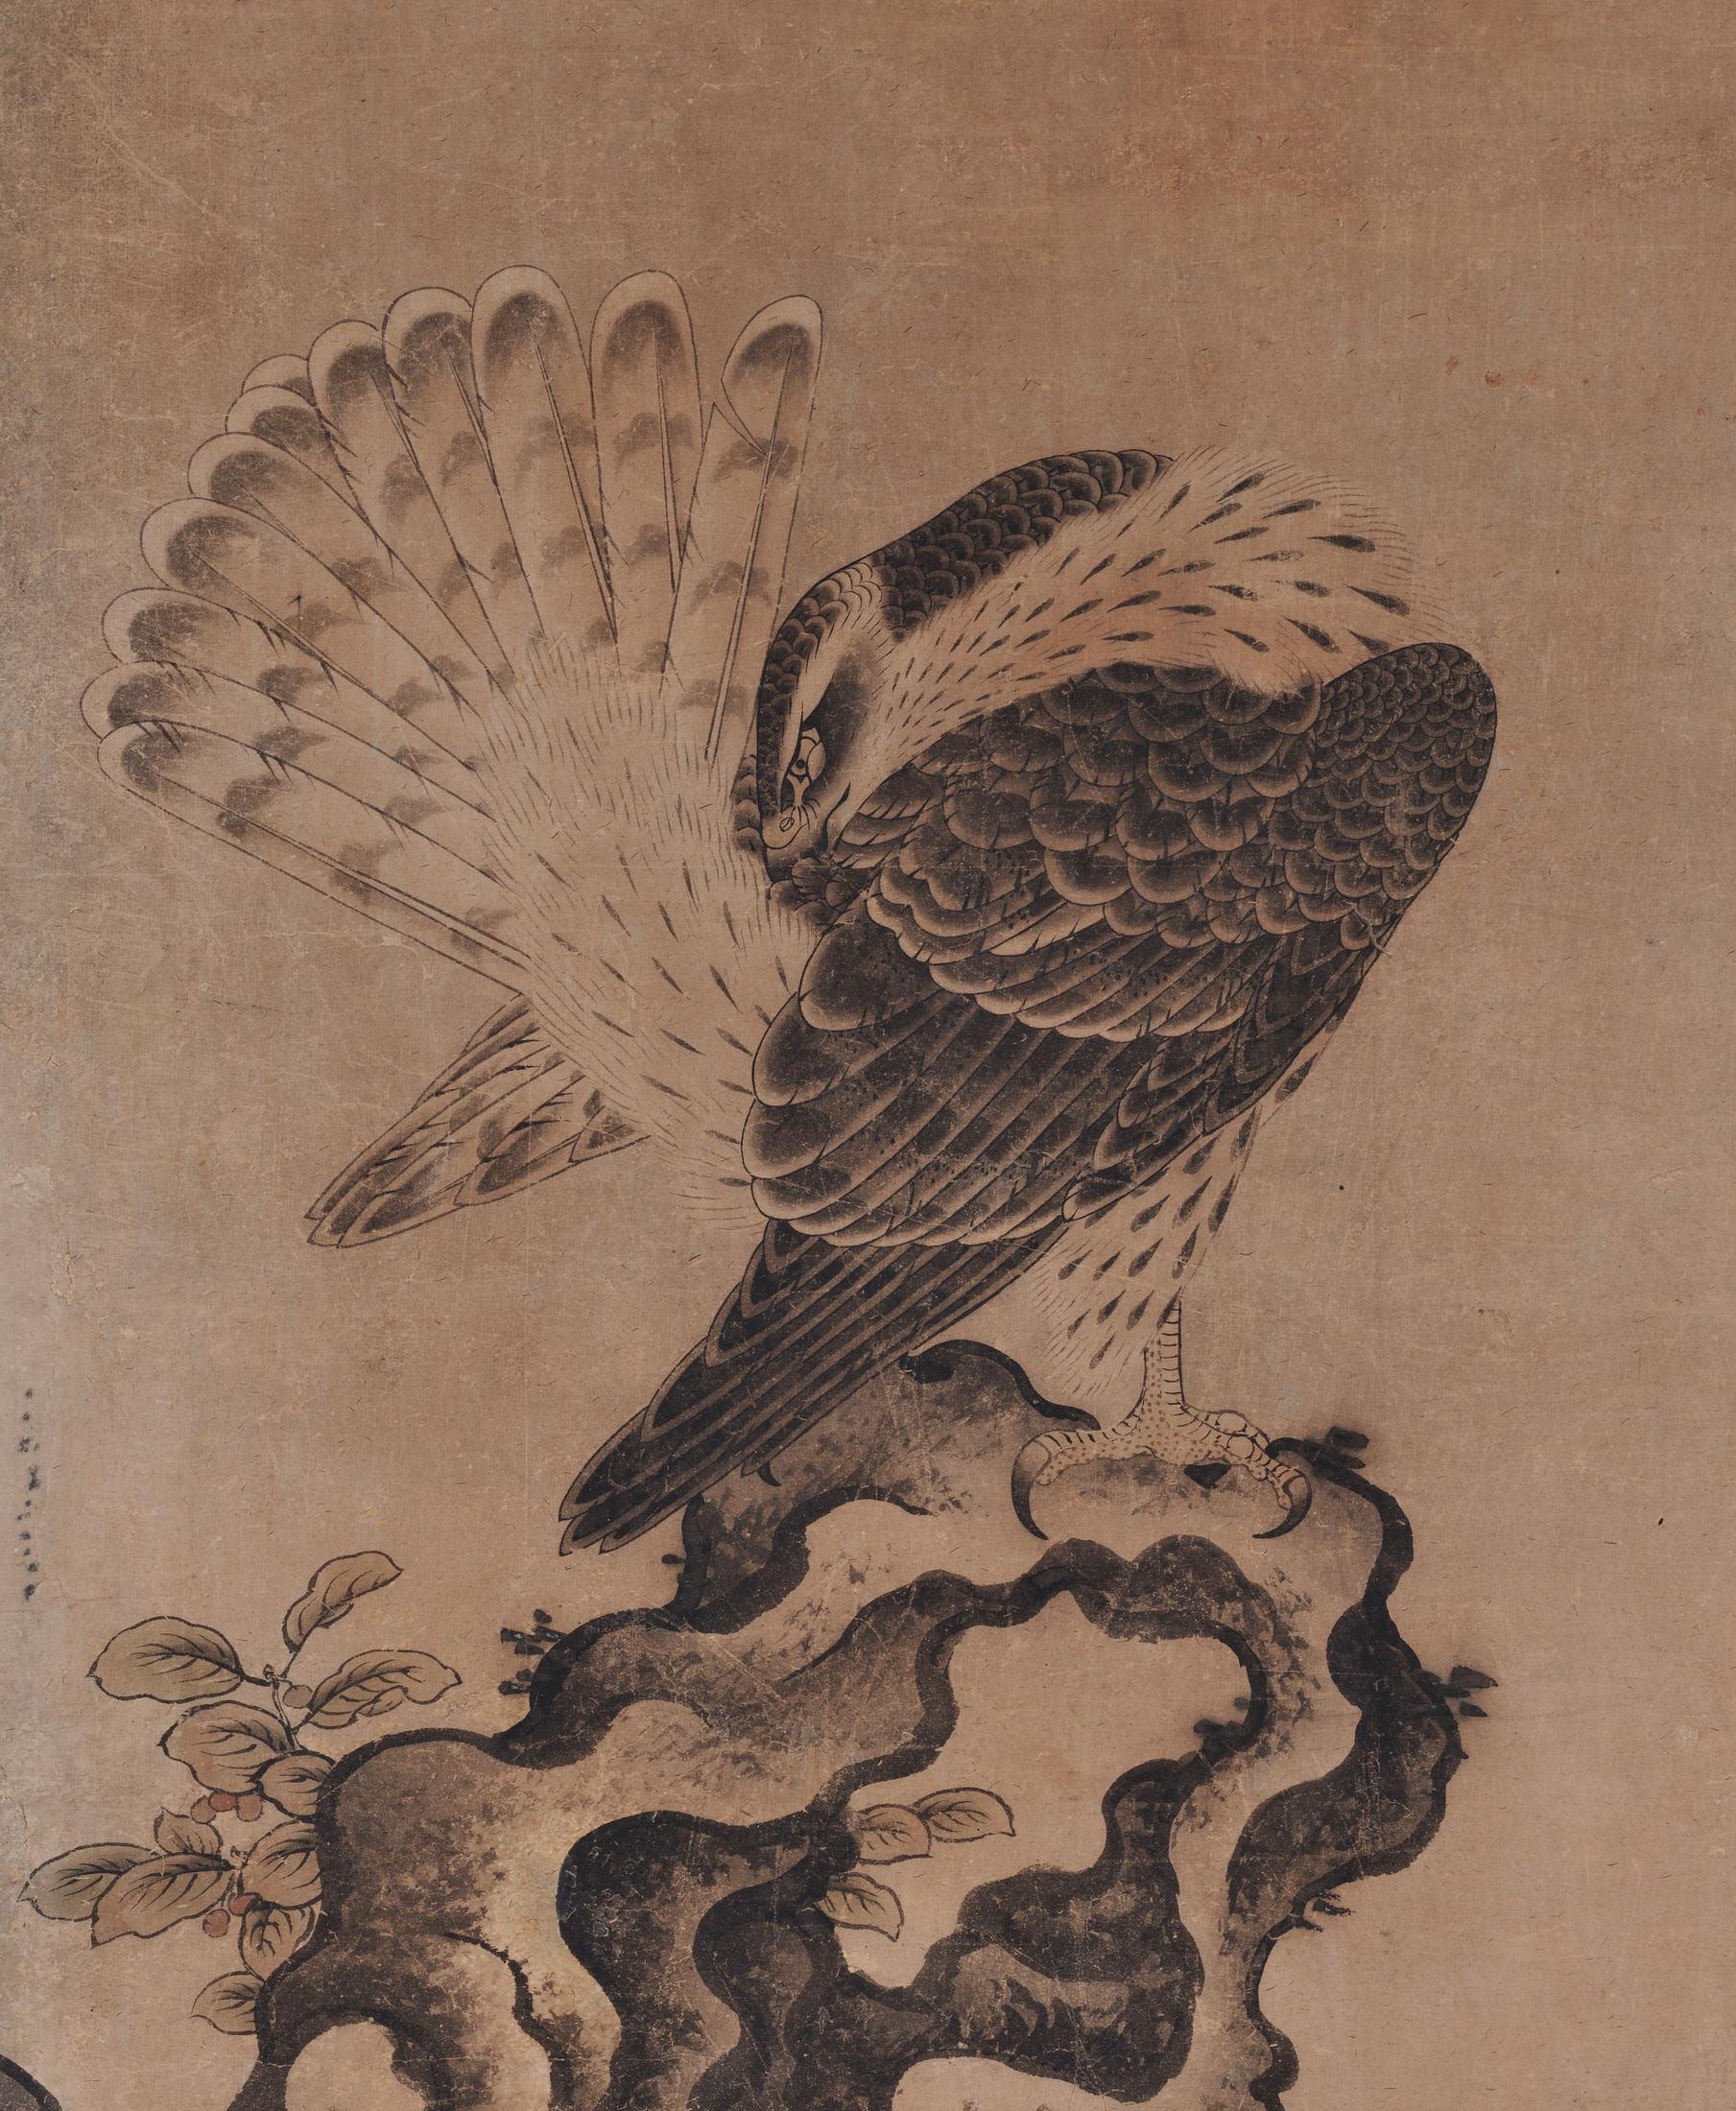 Mitani Toshuku (1577-1654)
“Falcon”
Wall panel, ink and light color on paper.
Upper seal: Mitani
Lower seal: Toshuku
Dimensions:
Each 118.5 cm x 51 cm x 2 cm (46.5” x 20” x .75”)

Individual falcon paintings by Mitani Toshuku (1577-1654), an